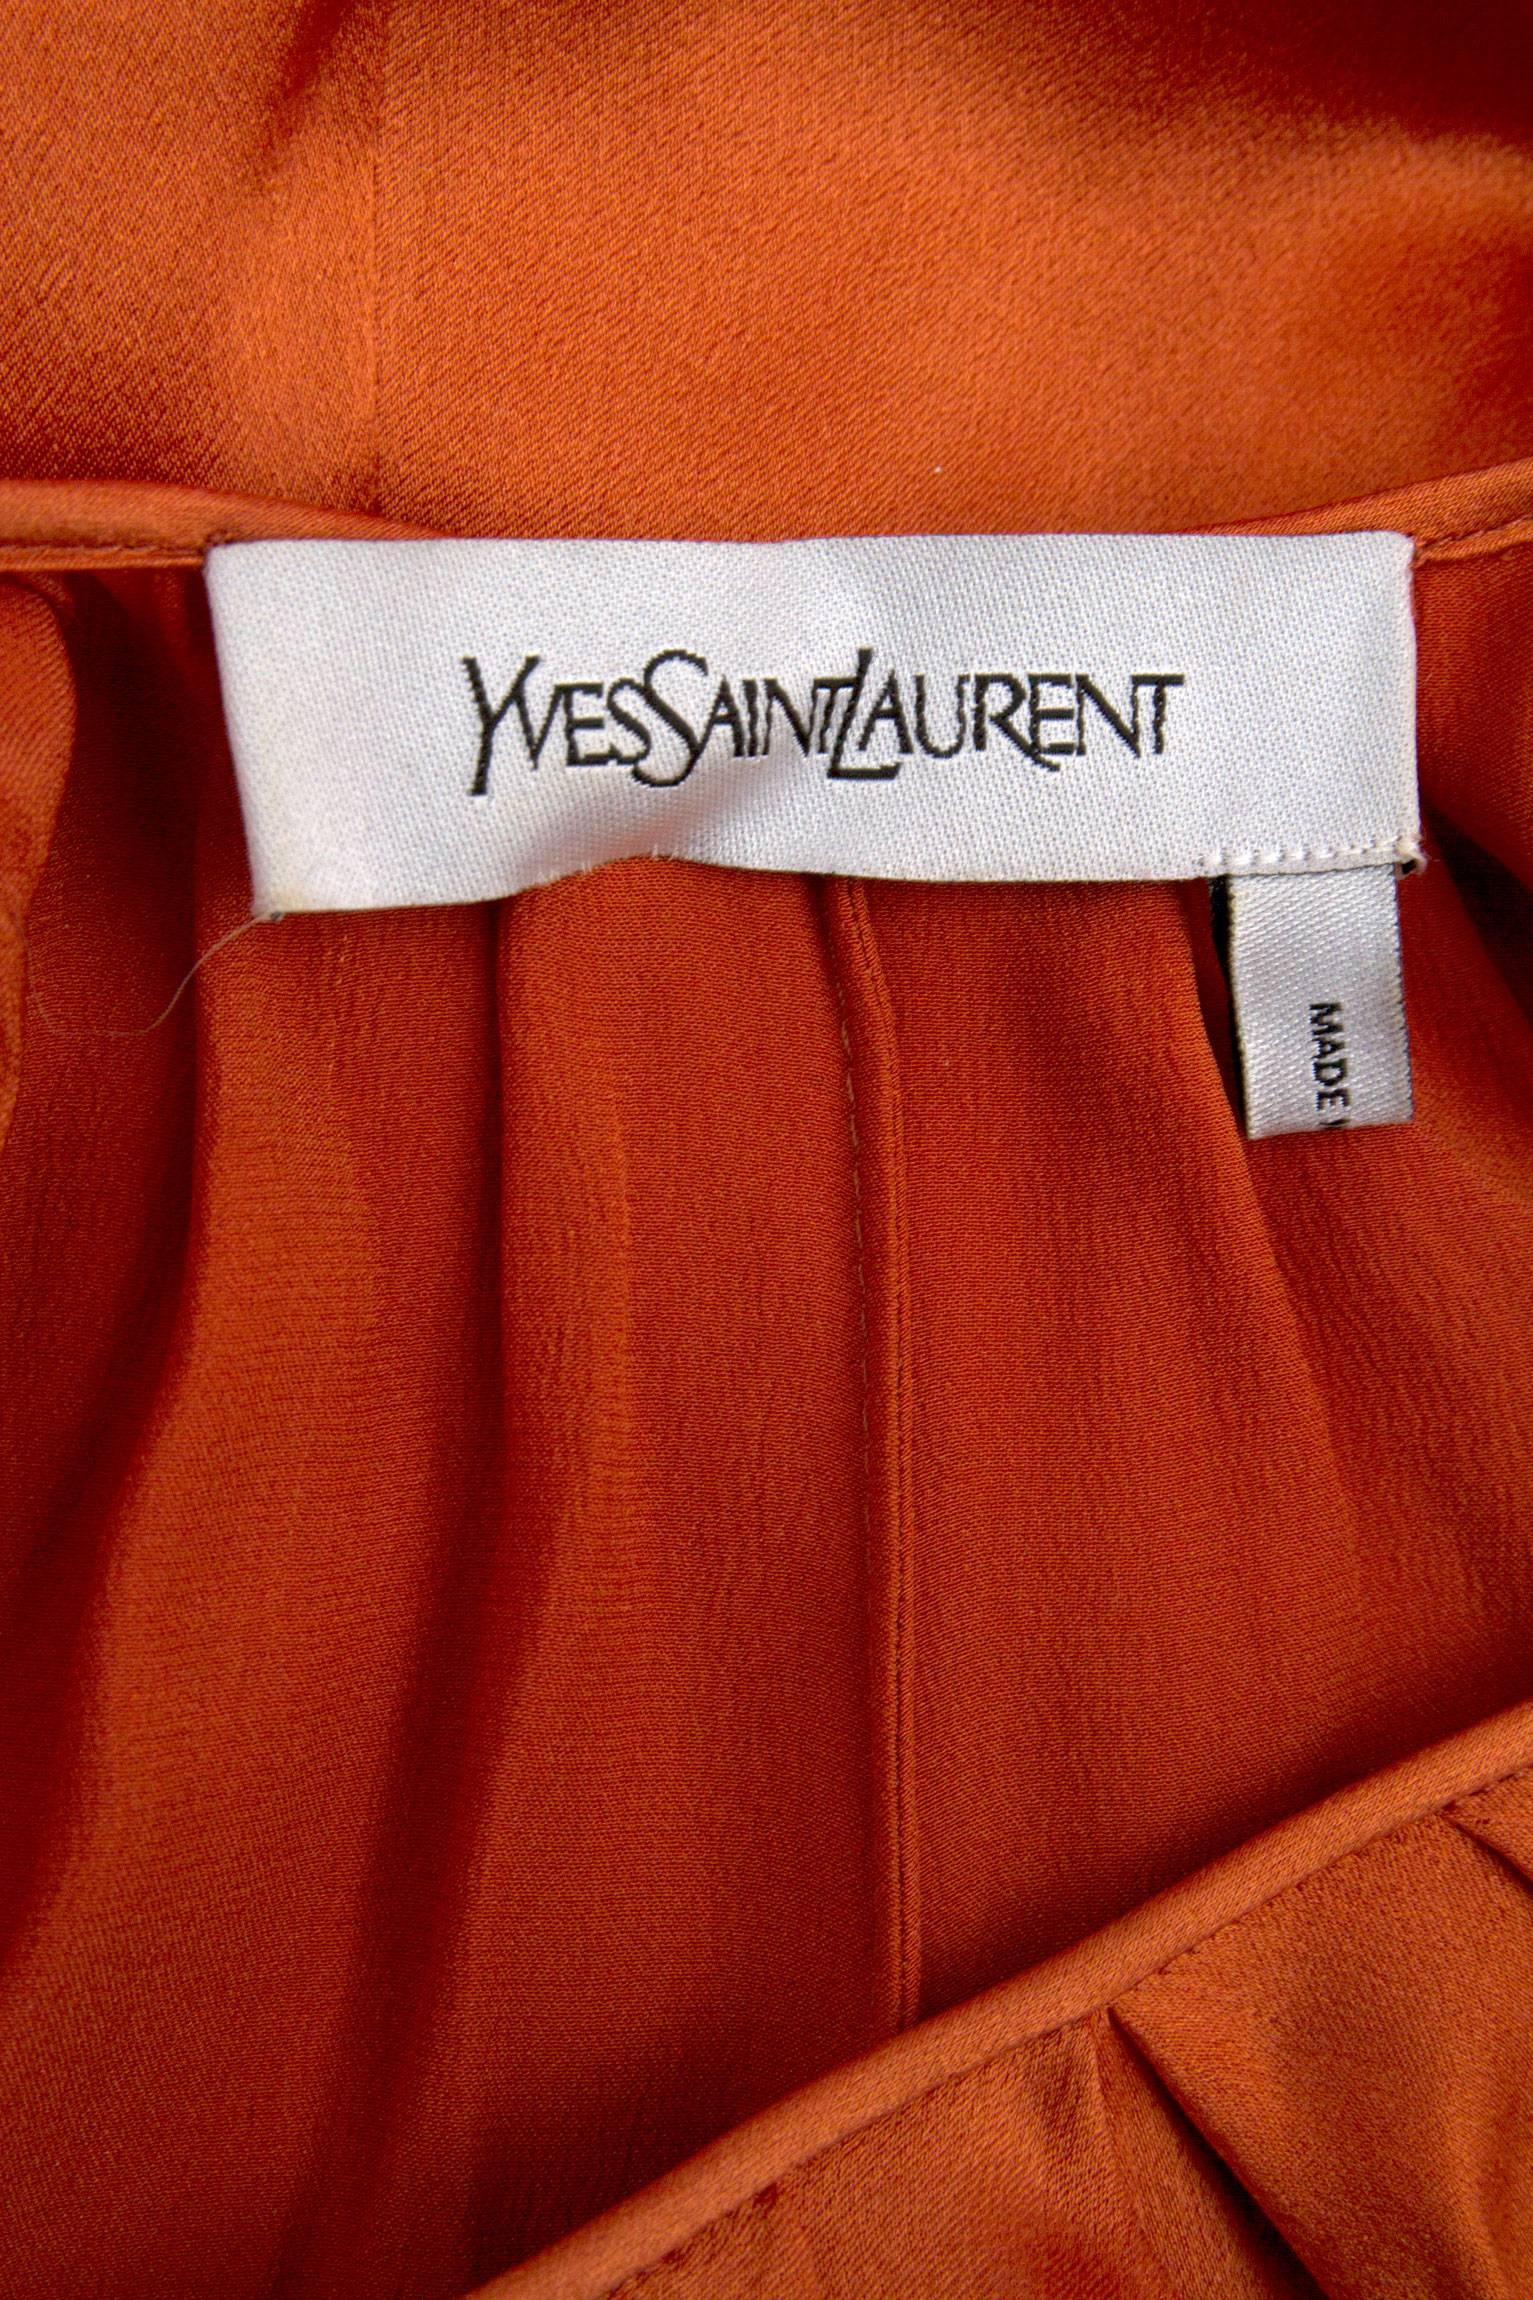 A gorgeous 1990s beuatifully draped Yves Saint Laurent silk dress made in a soft tangerine colored silk. Loose draped sleeves are attached to the round neckline and decent below the arms and is attached to the back, providing volume to the side of